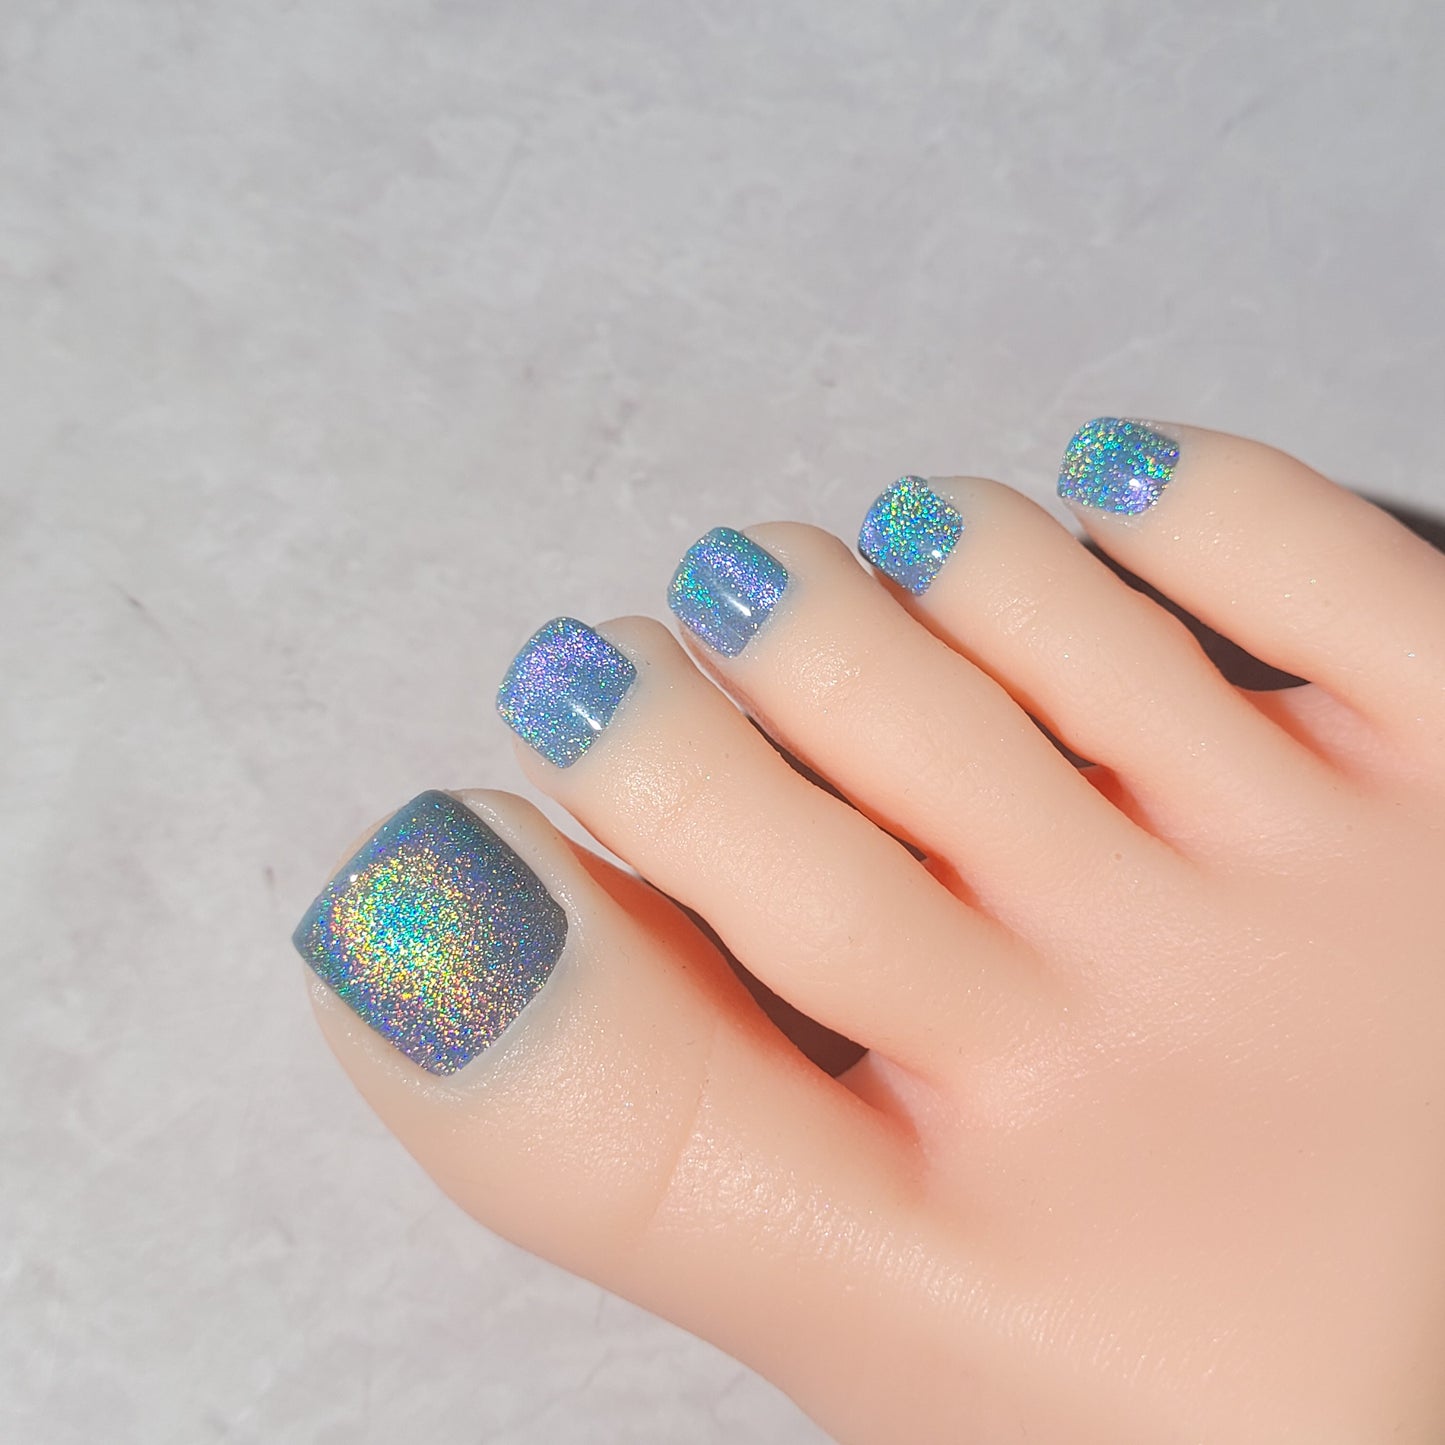 Press on nails pieds: "Icy holo"